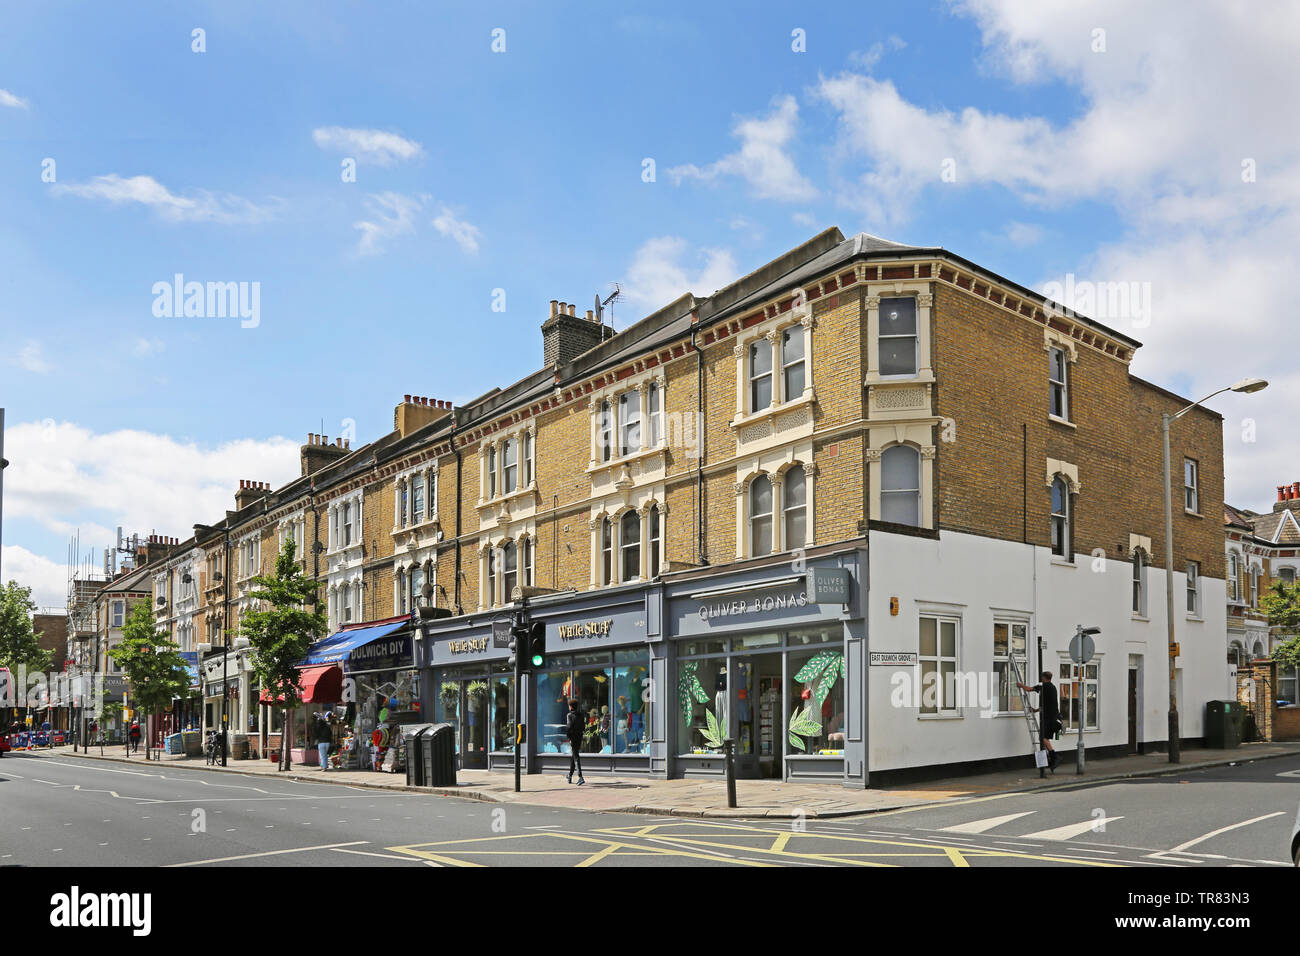 Shops on Lordship Lane, East Dulwich, London, UK. Shows Oliver Bonas and White Stuff. Junction with Dulwich Grove. No traffic - very unusual! Stock Photo